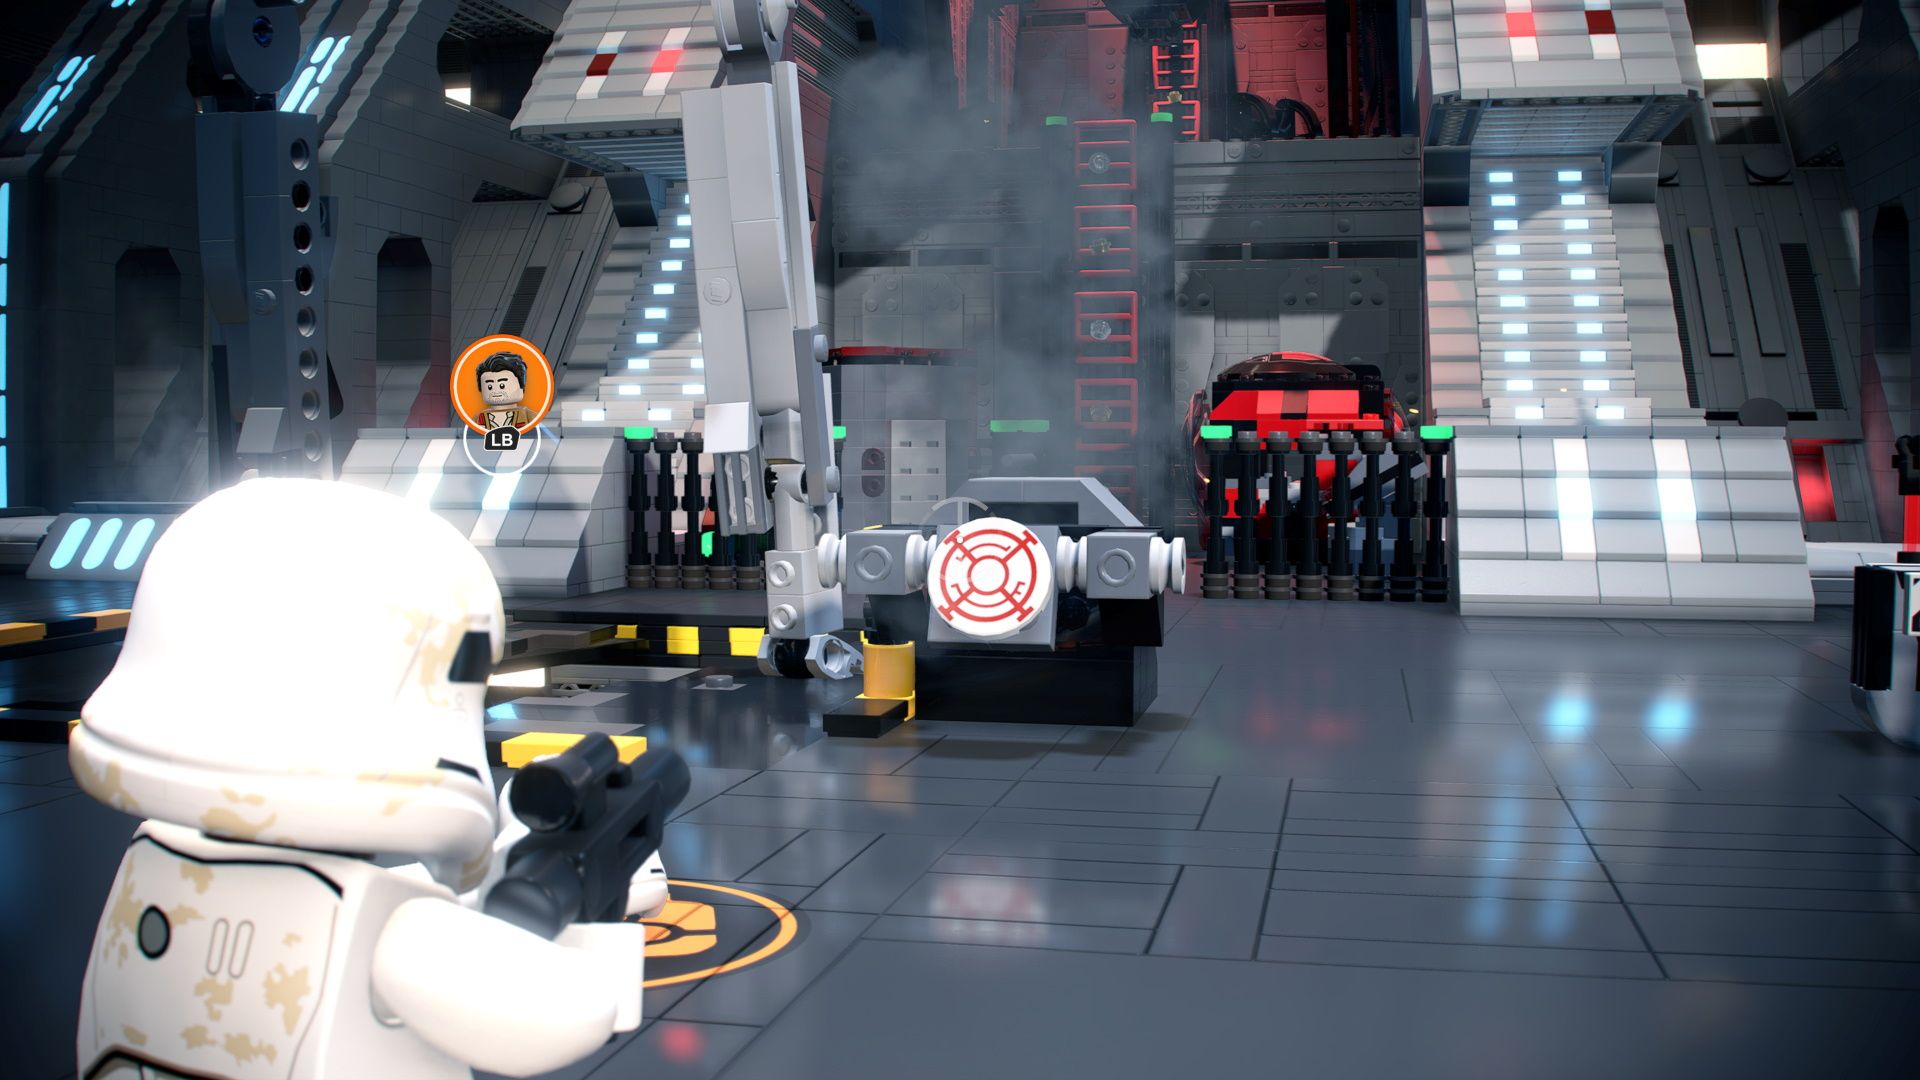 Finn shooting targets to take out Stormtroopers.